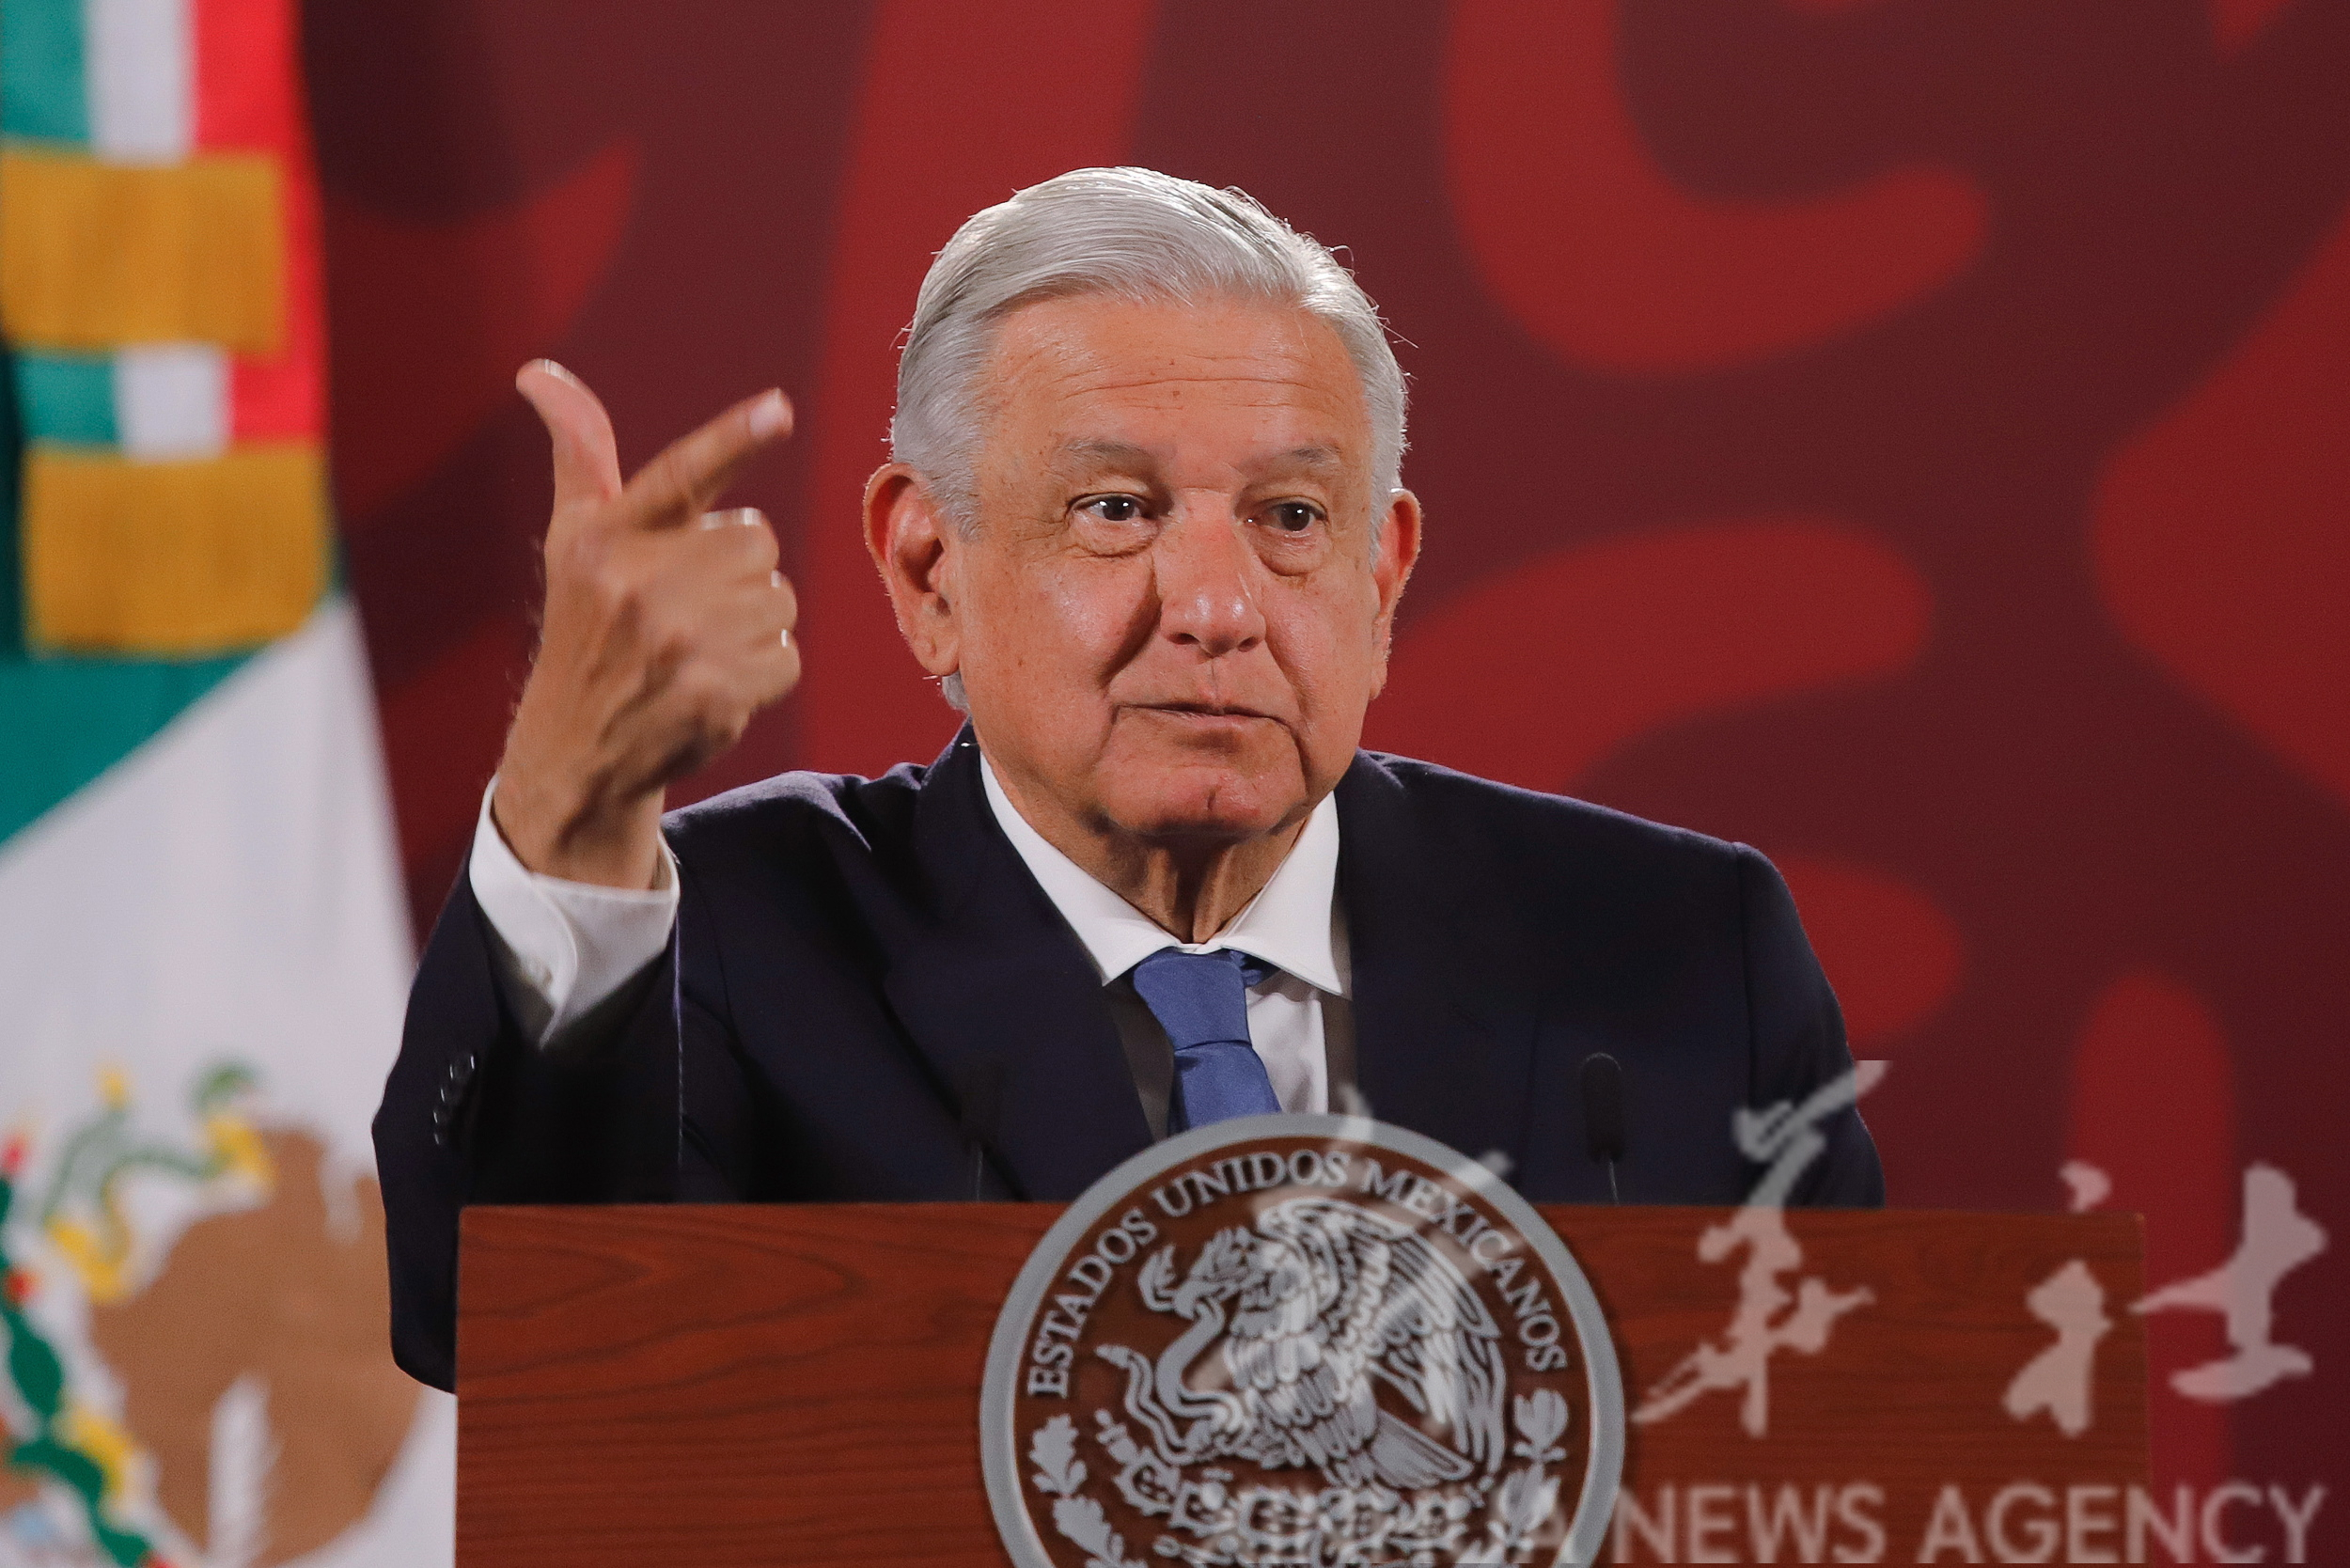 The President of Mexico Andres Manuel Lopez Obrador offers his morning conference, at the National Palace in Mexico City, Mexico, 09 May 2022.